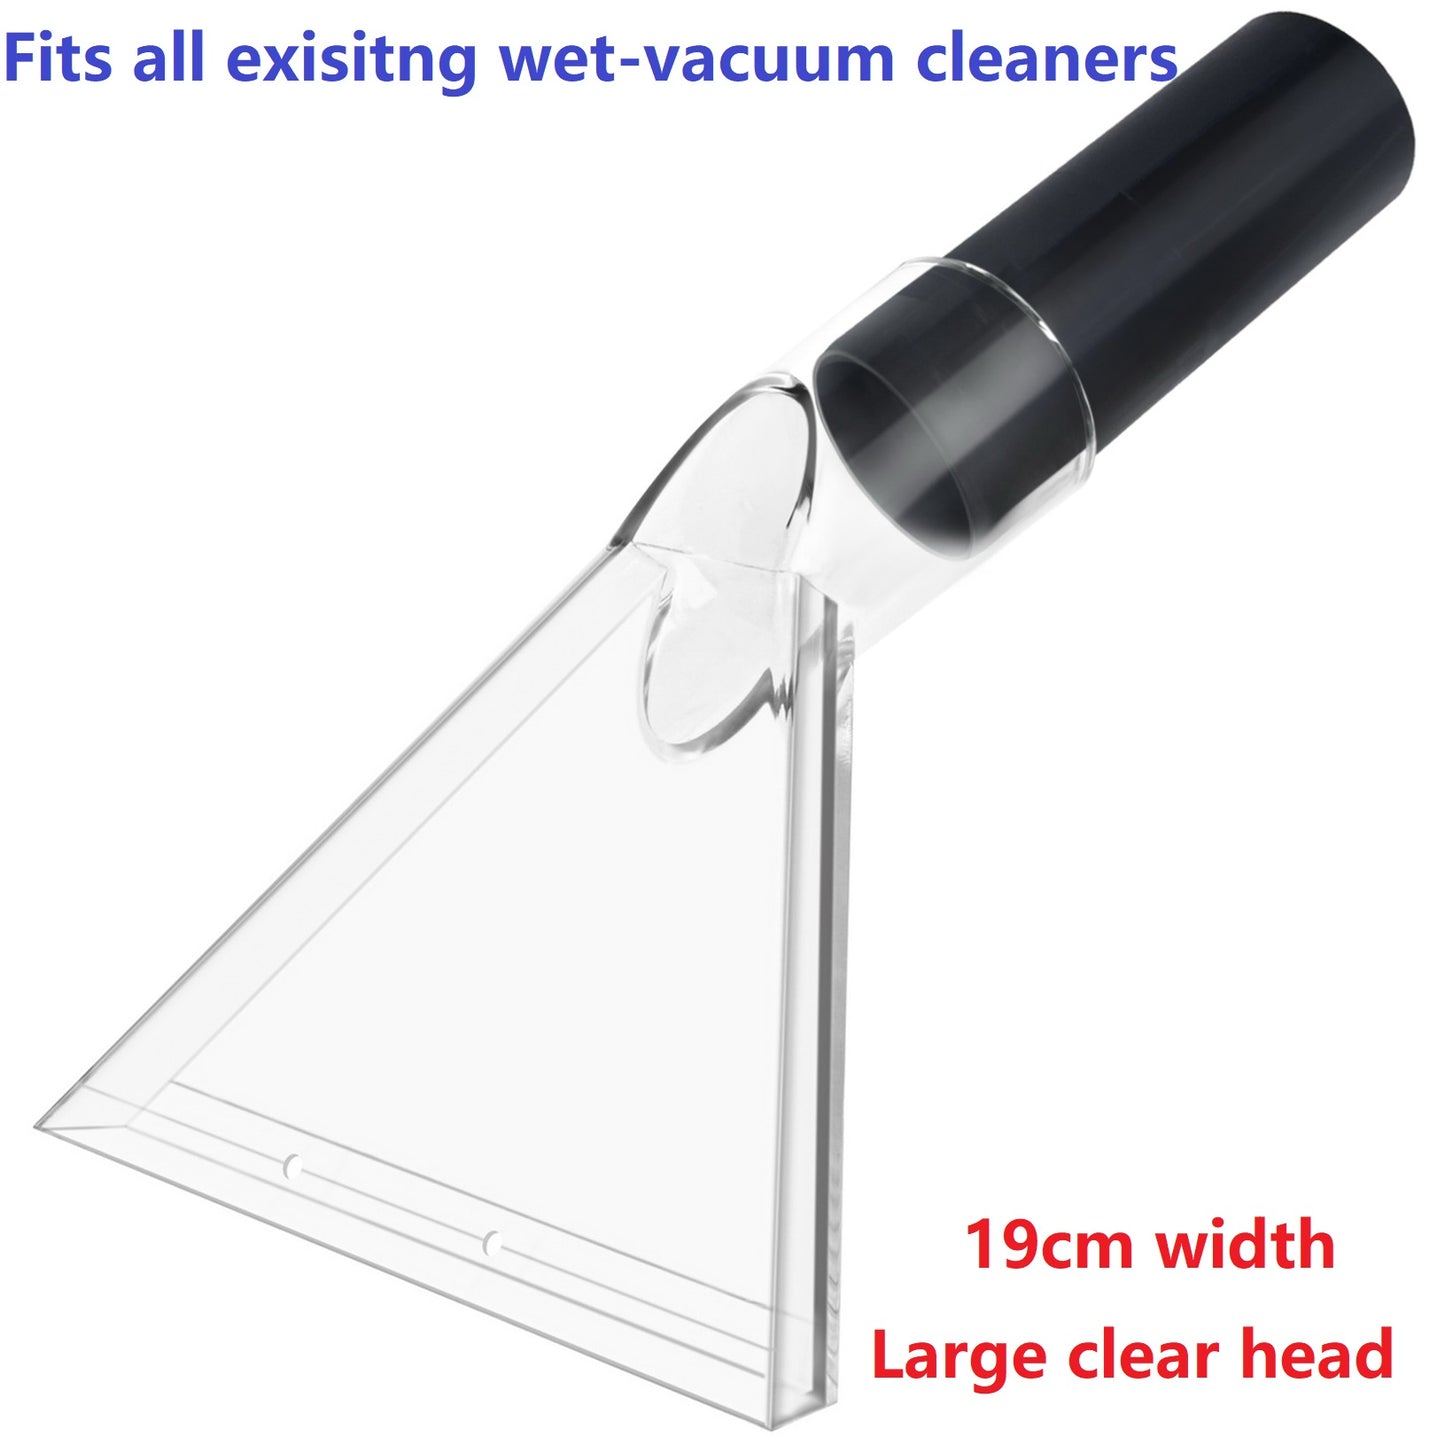 Carpet Vac Extractor Attachment Tool 1 Hose Cuff 4 Adapter Cleaning Vacuum  Clear Upholstery Car Detailing Turn Shop Vac Into An Extractor For Auto Det